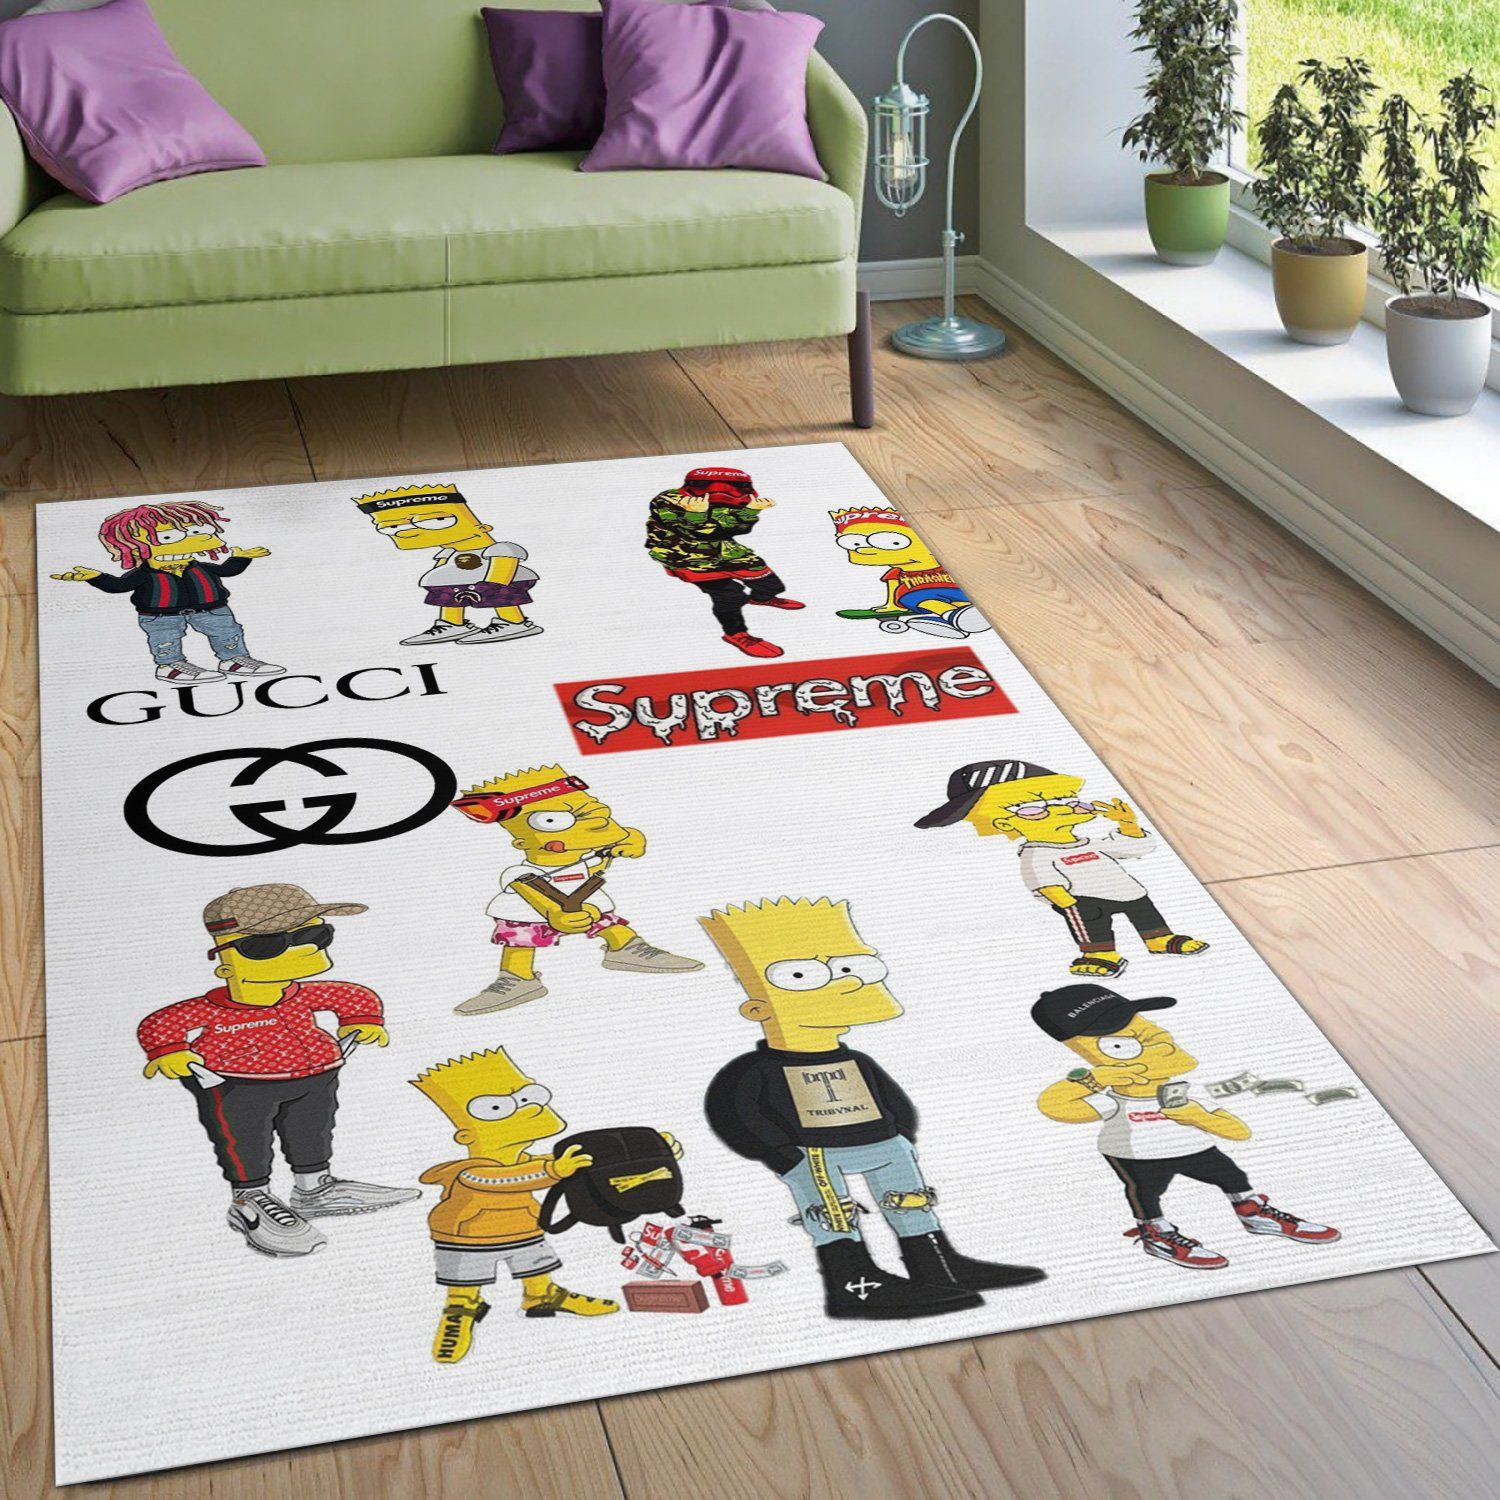 Gucci Supreme The Simpsons Rectangle Rug Home Decor Area Carpet Door Mat Luxury Fashion Brand